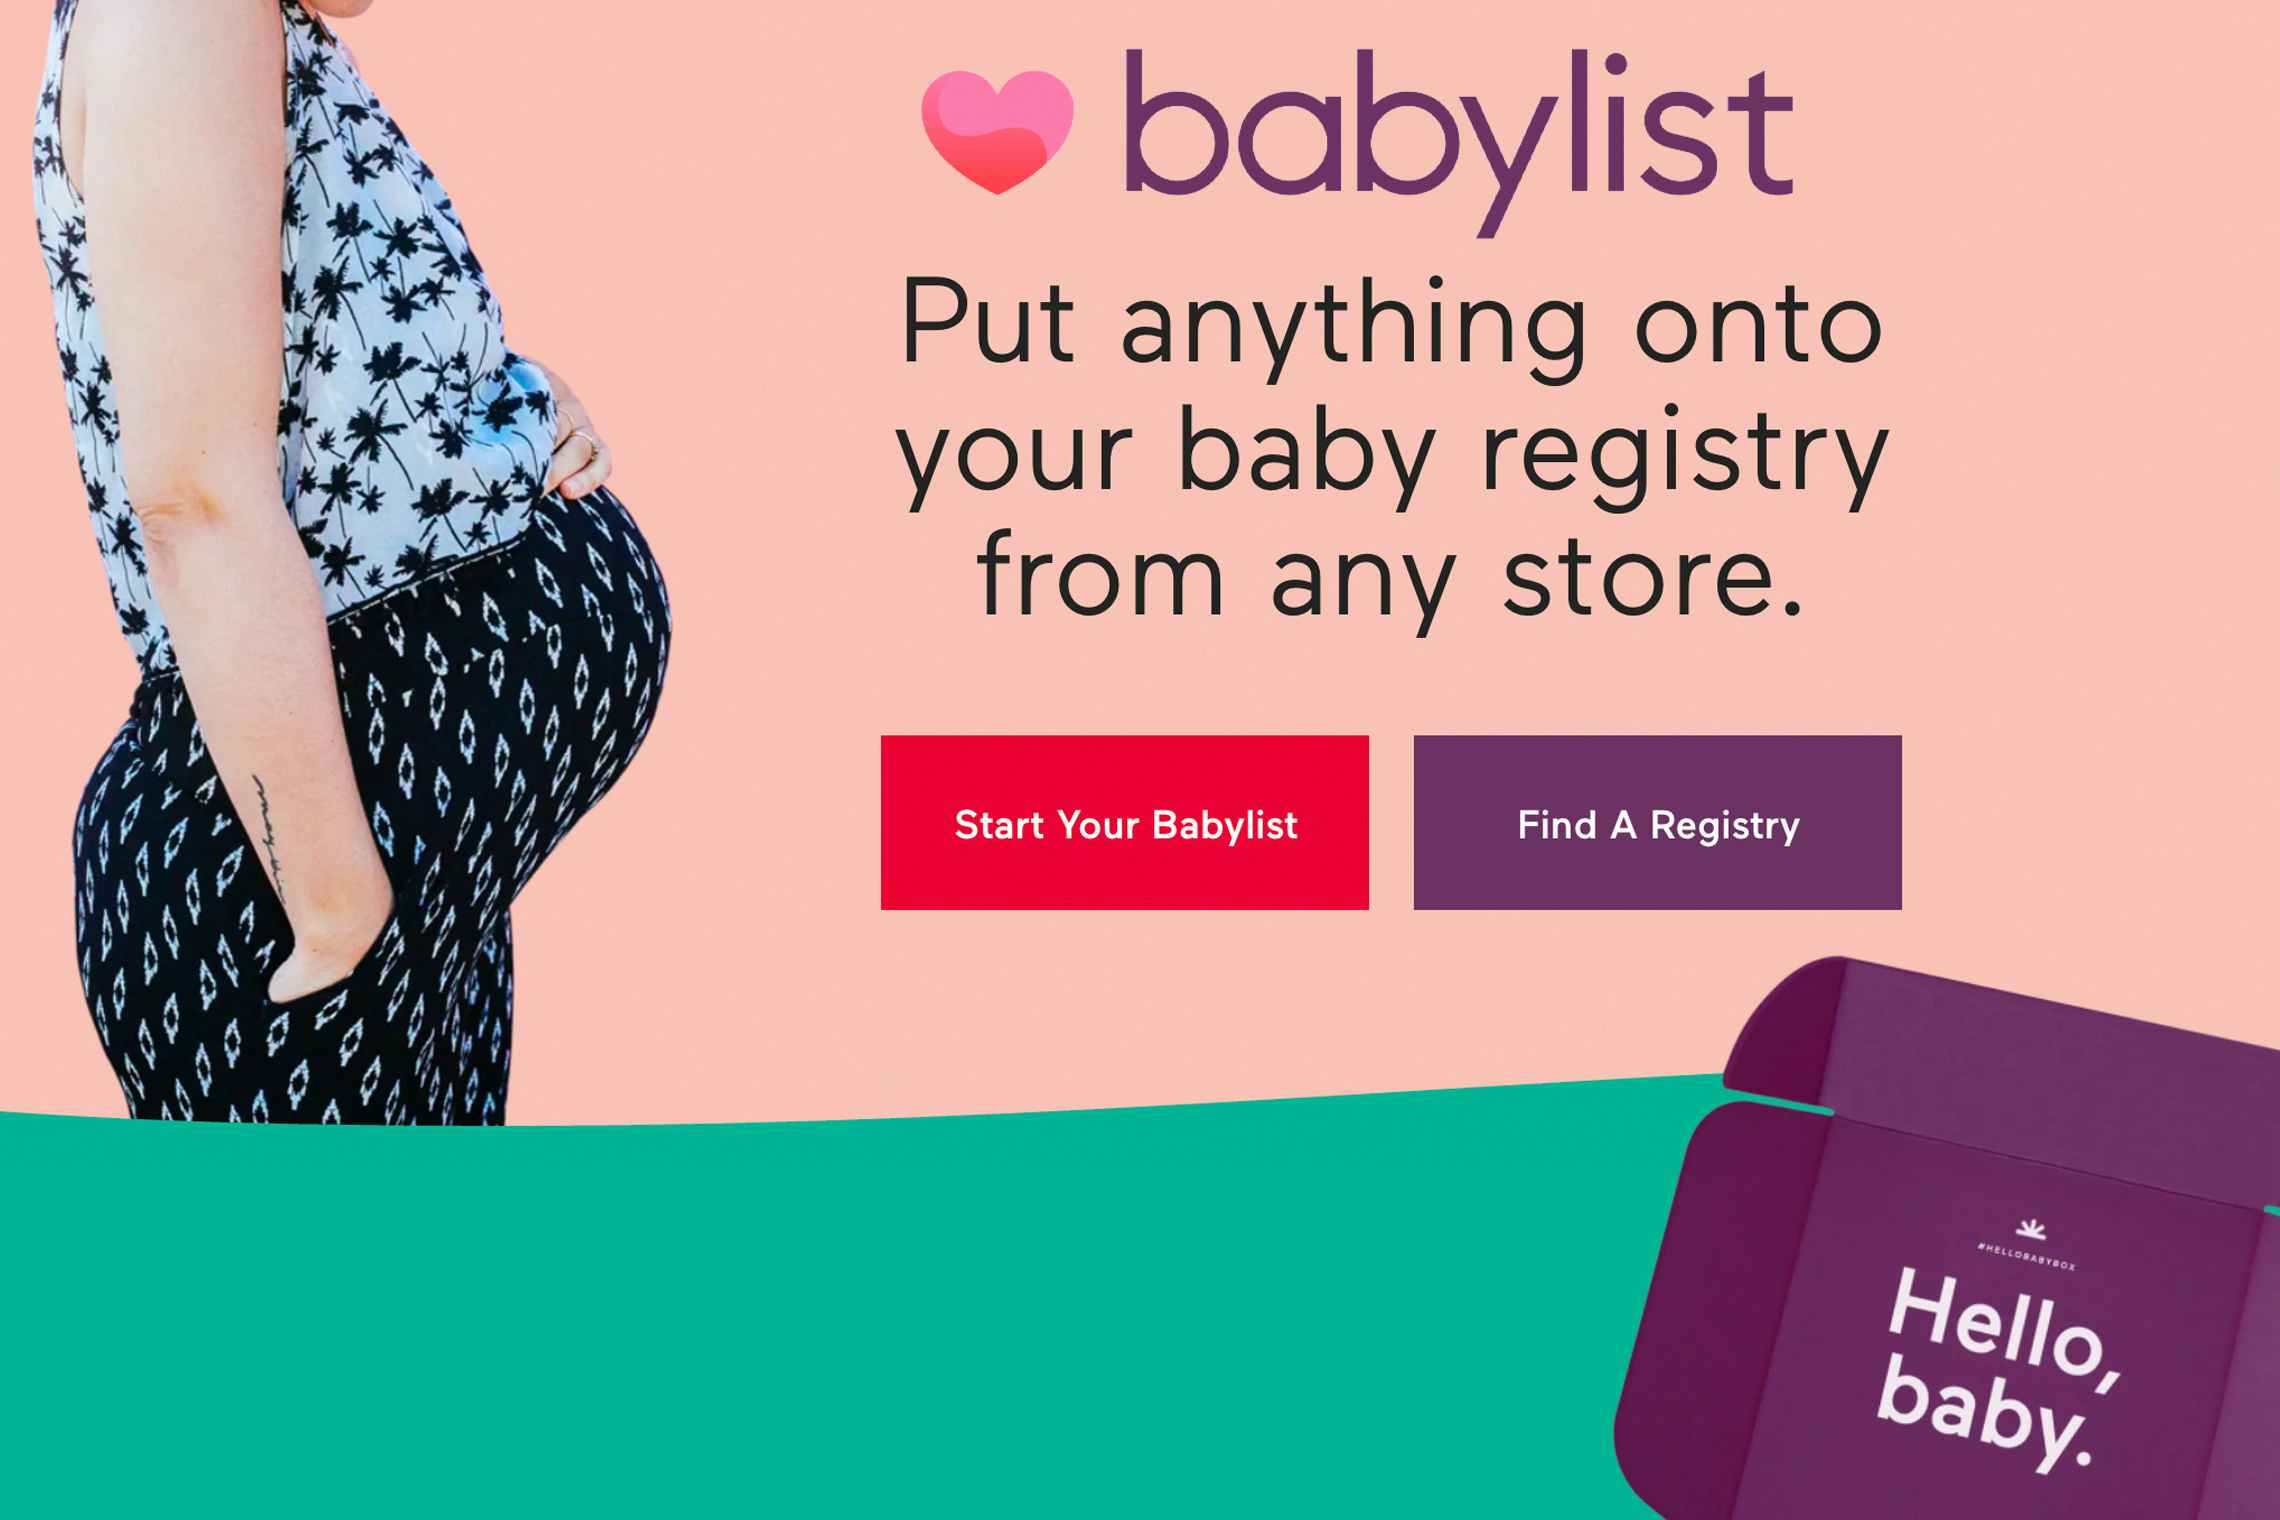 A Babylist.com website screenshot that reads, "babylist. Put anything onto your baby registry from any store." with an image of a ...